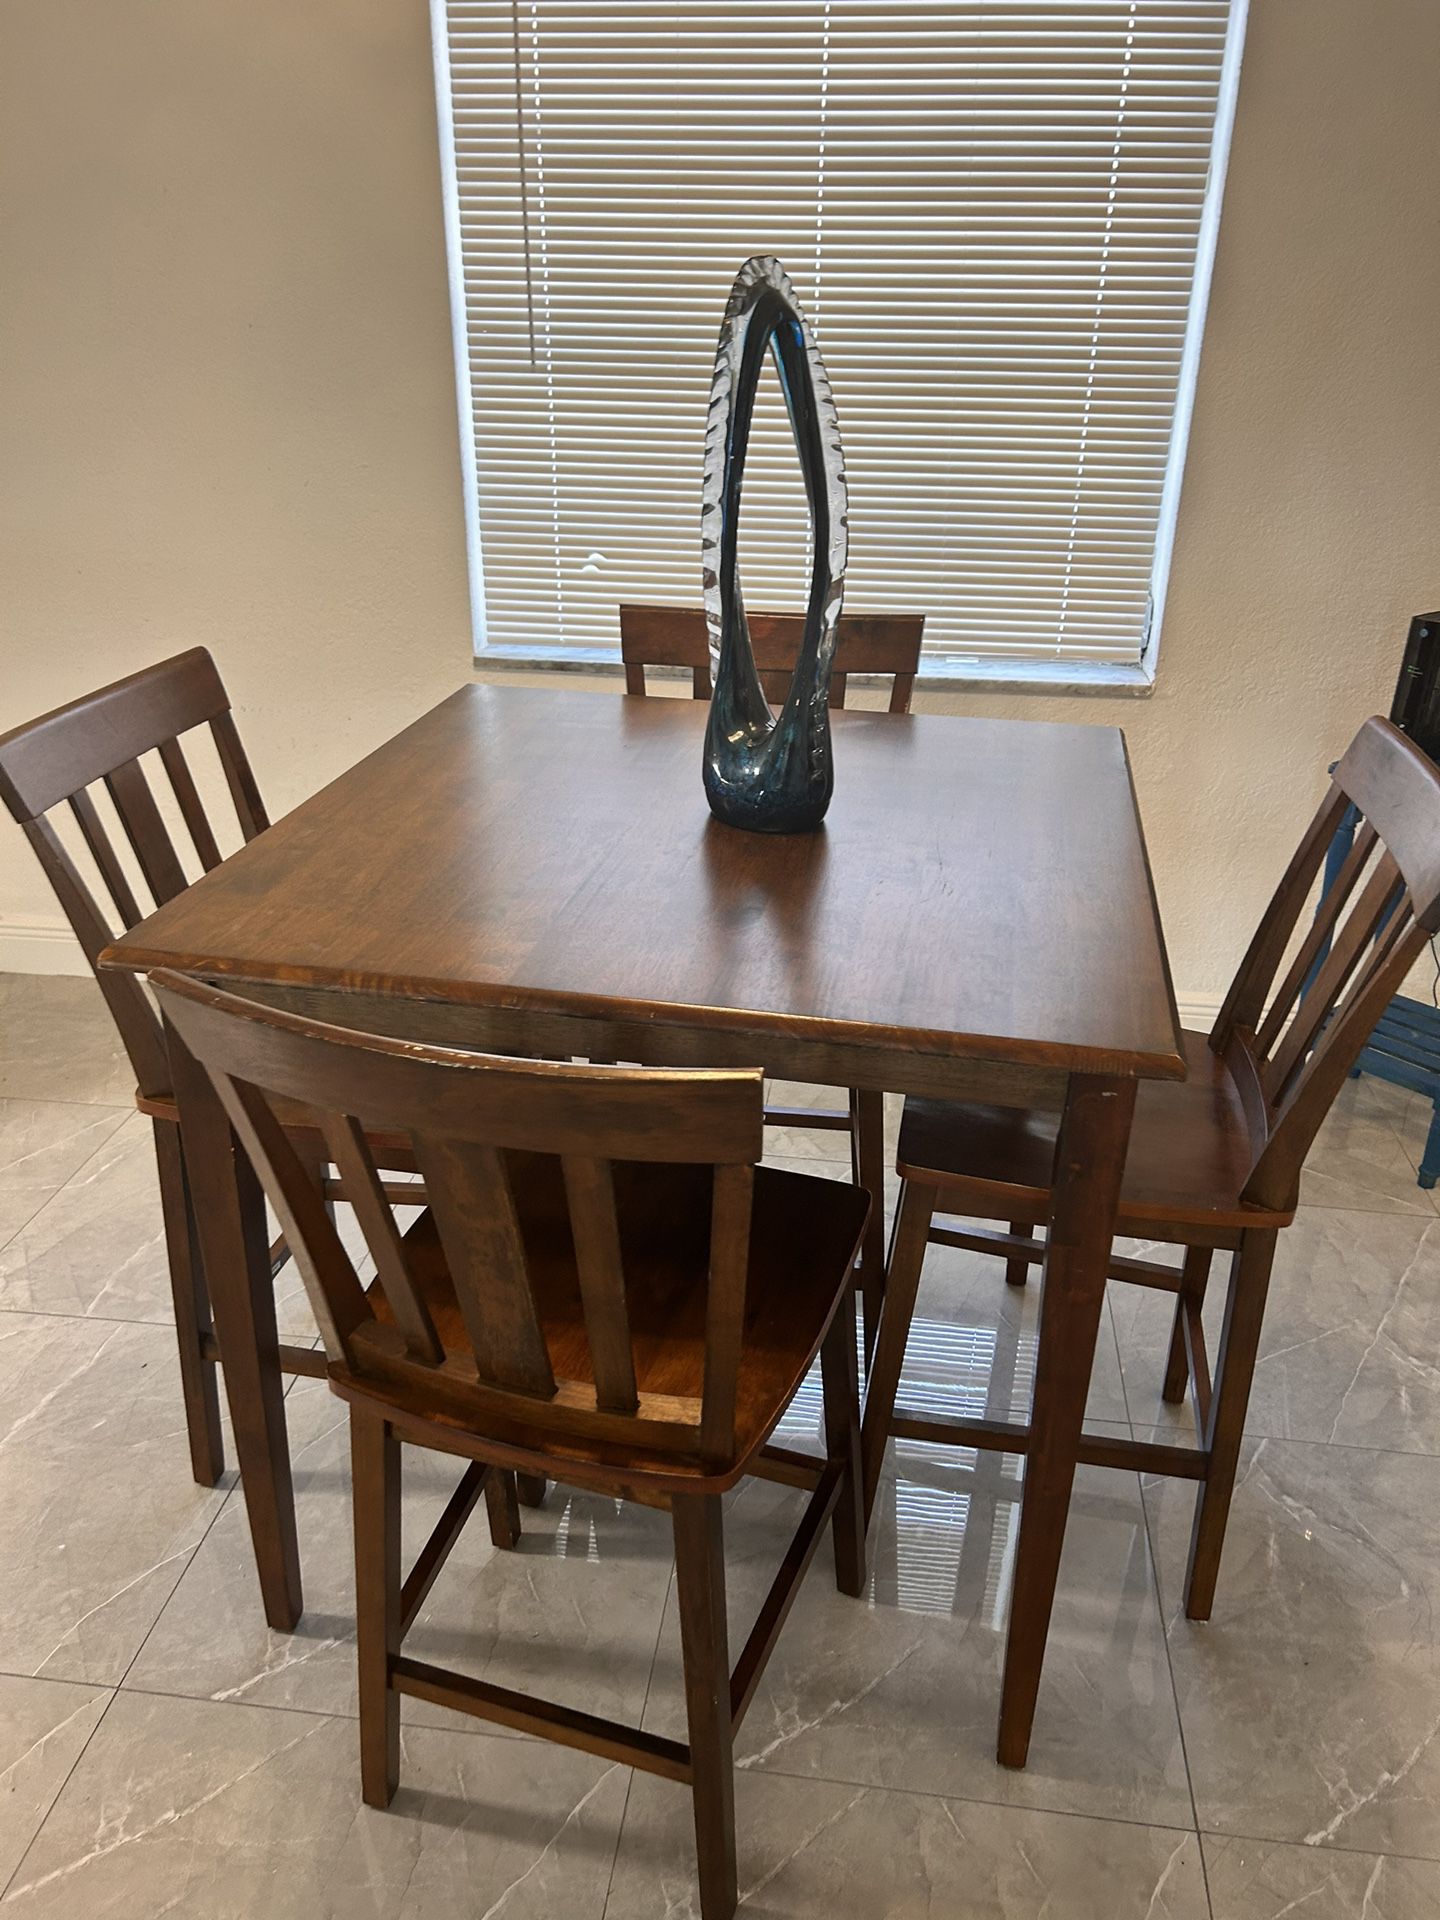 Wooden Table And 4 Chairs (pub)